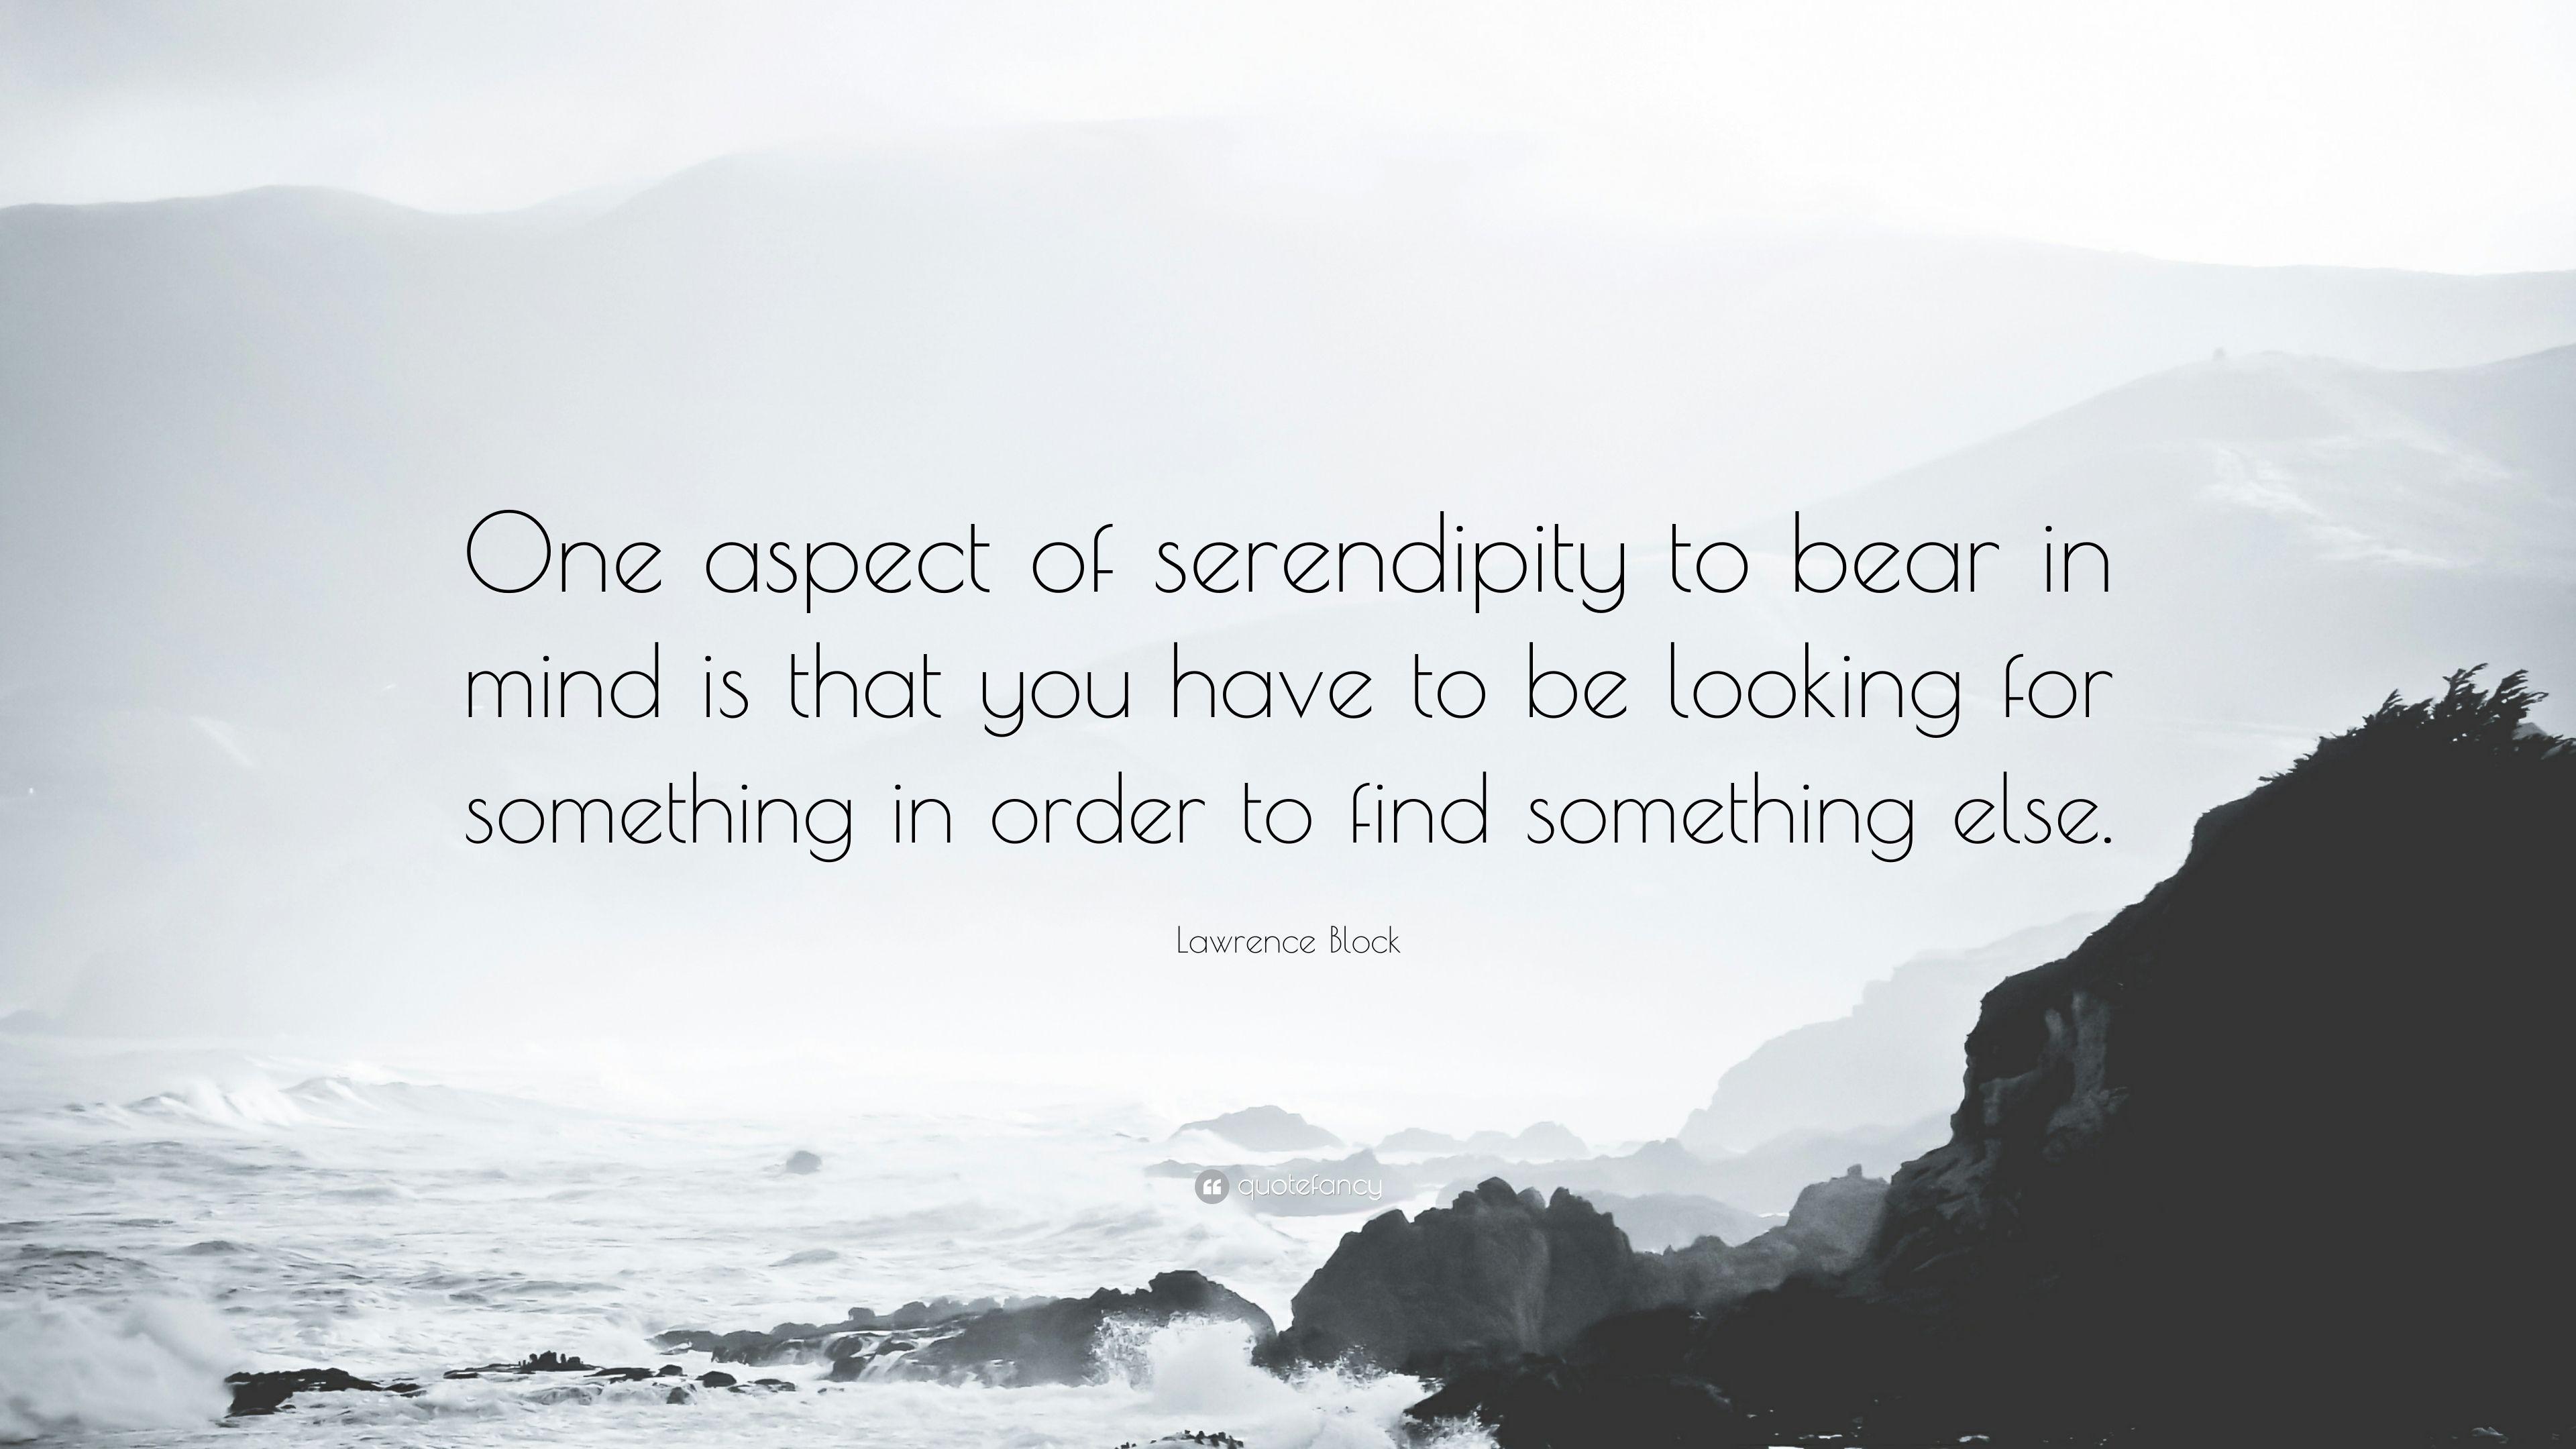 Lawrence Block Quote: “One aspect of serendipity to bear in mind is